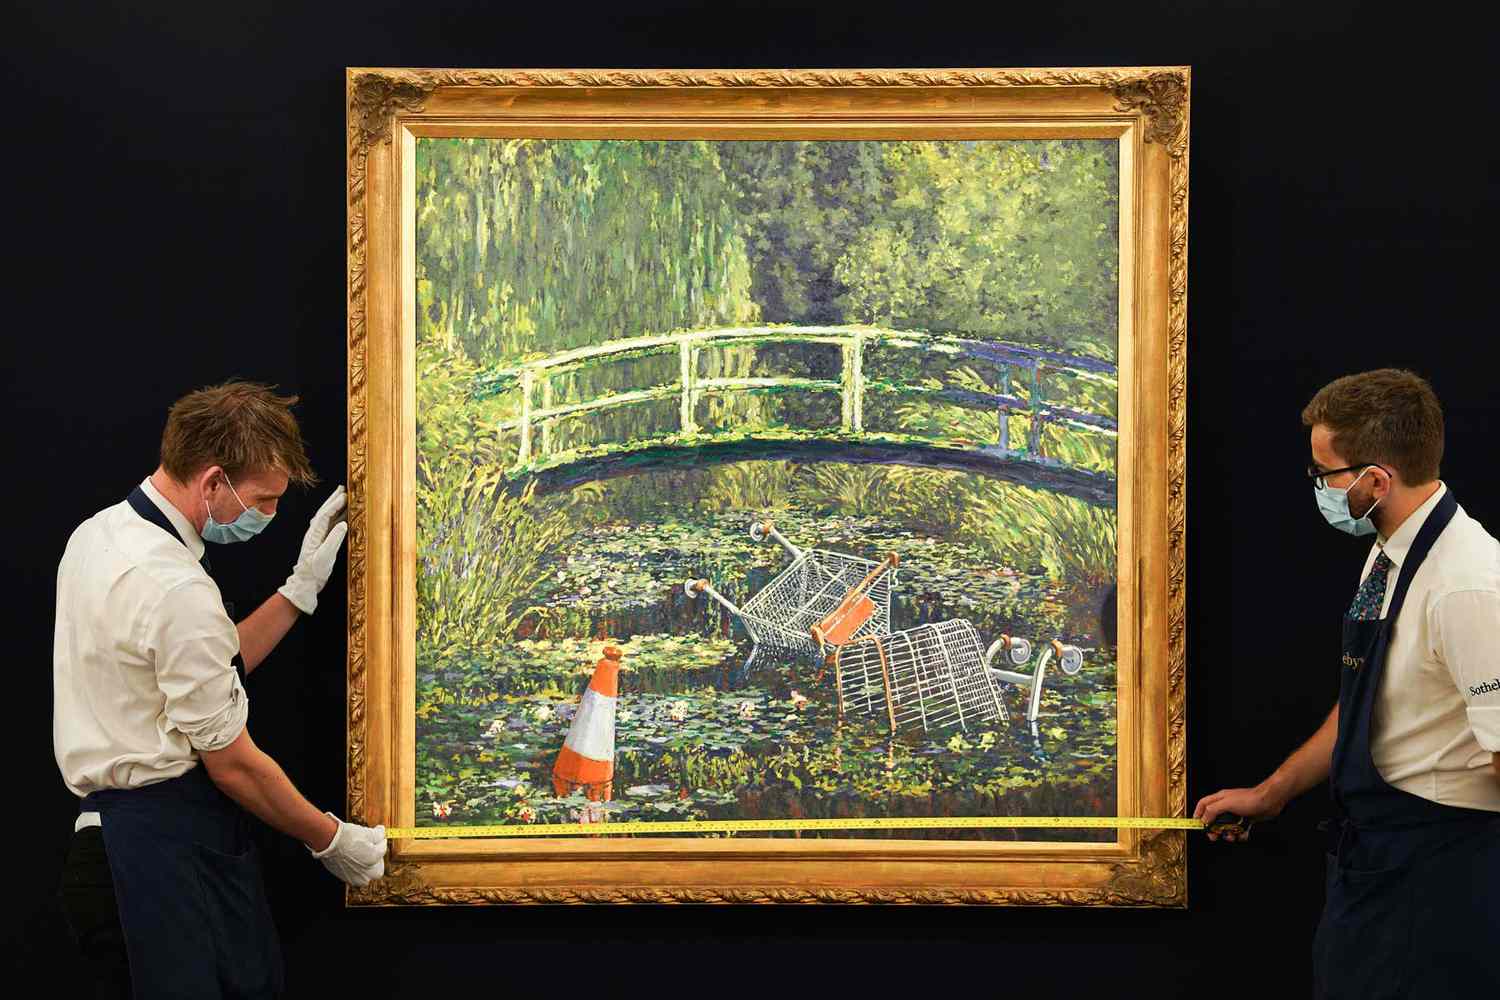 A Reimagined Monet Painting by Banksy Featuring Traffic Cones and Shopping Carts Is Going Up for Sale